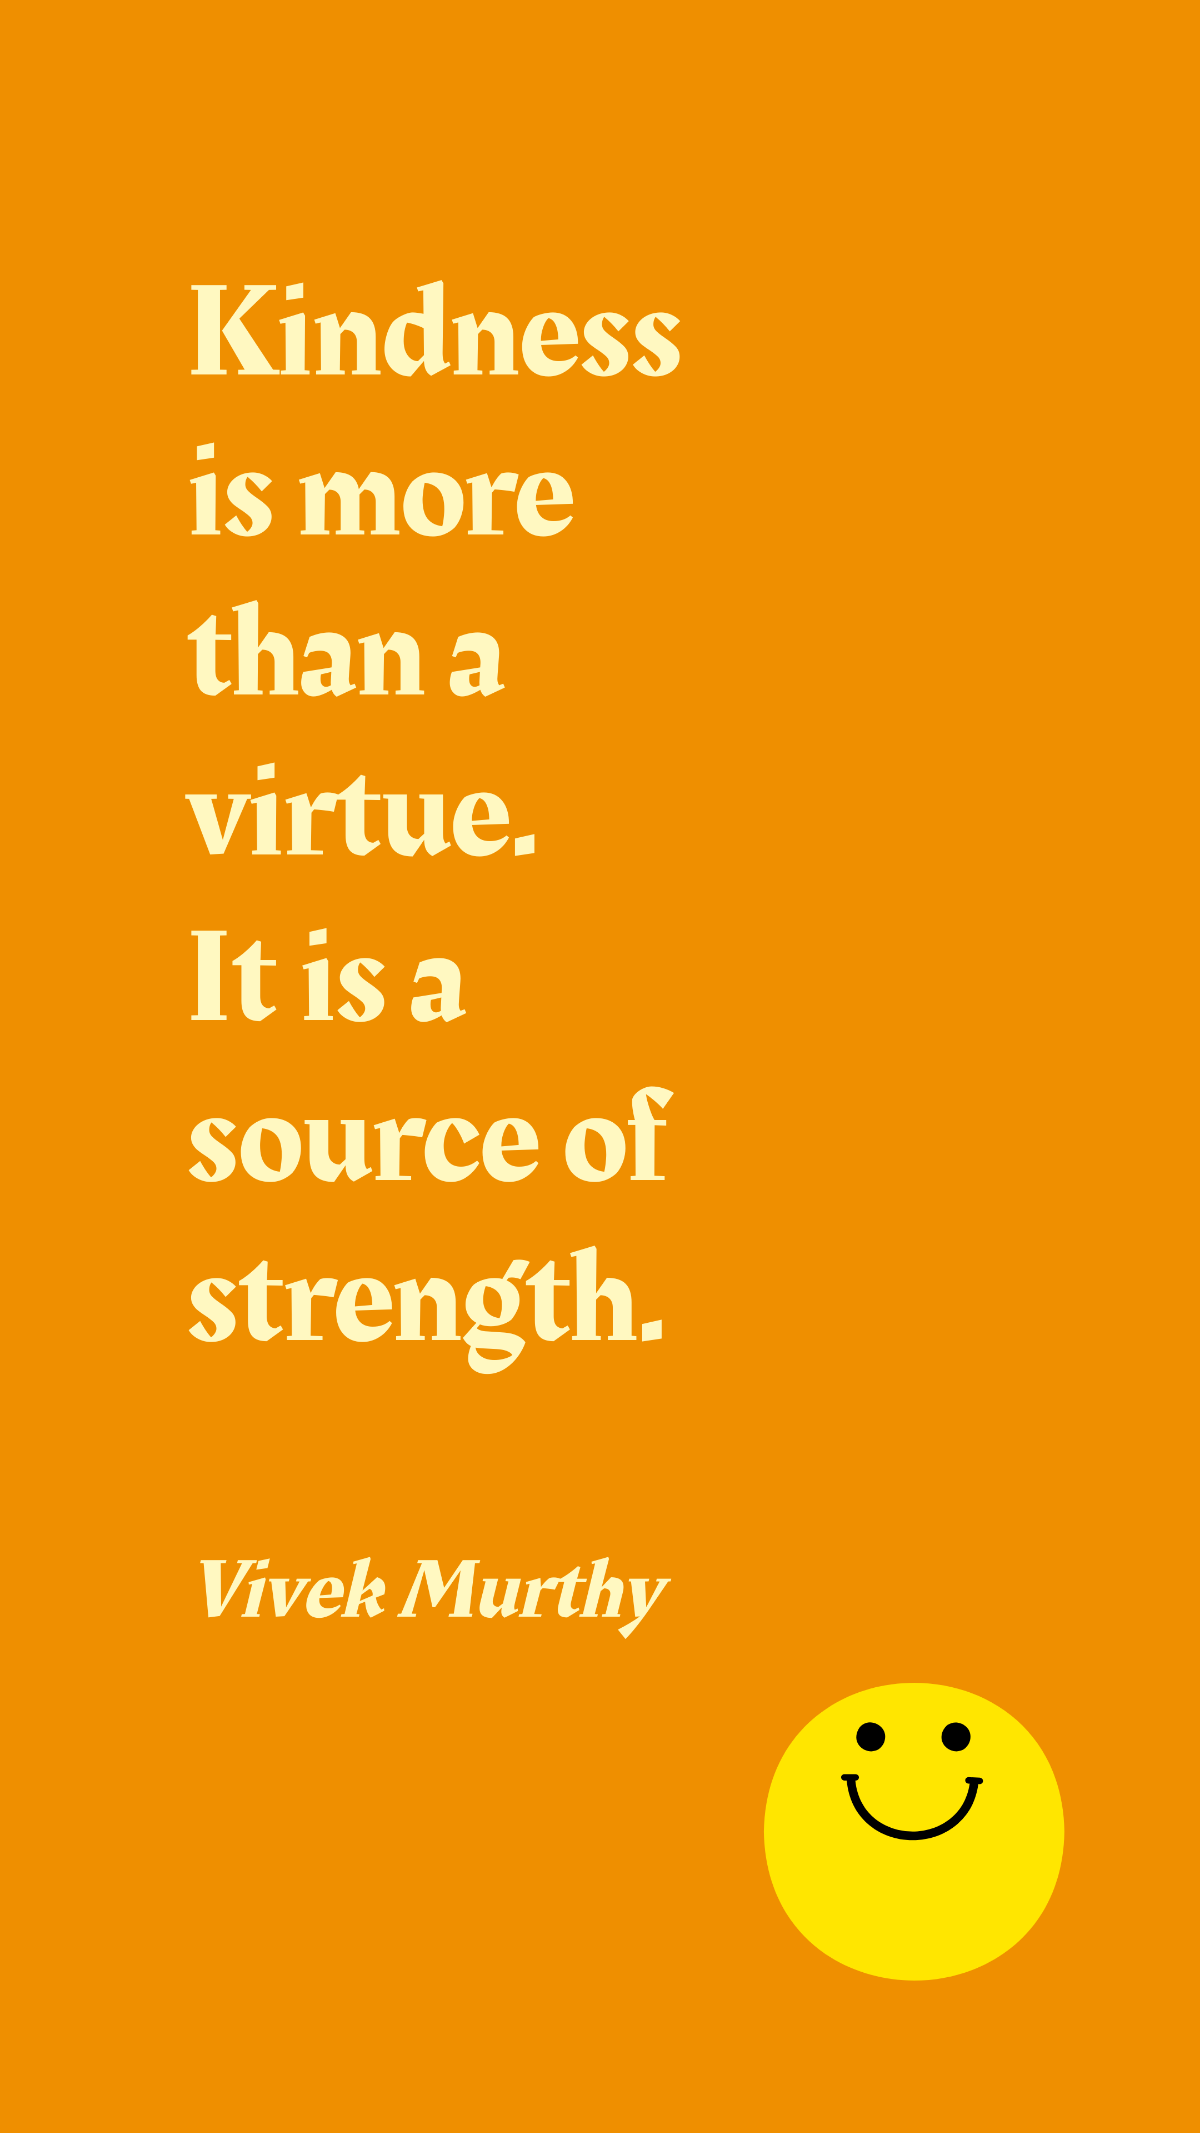 Vivek Murthy - Kindness is more than a virtue. It is a source of strength.